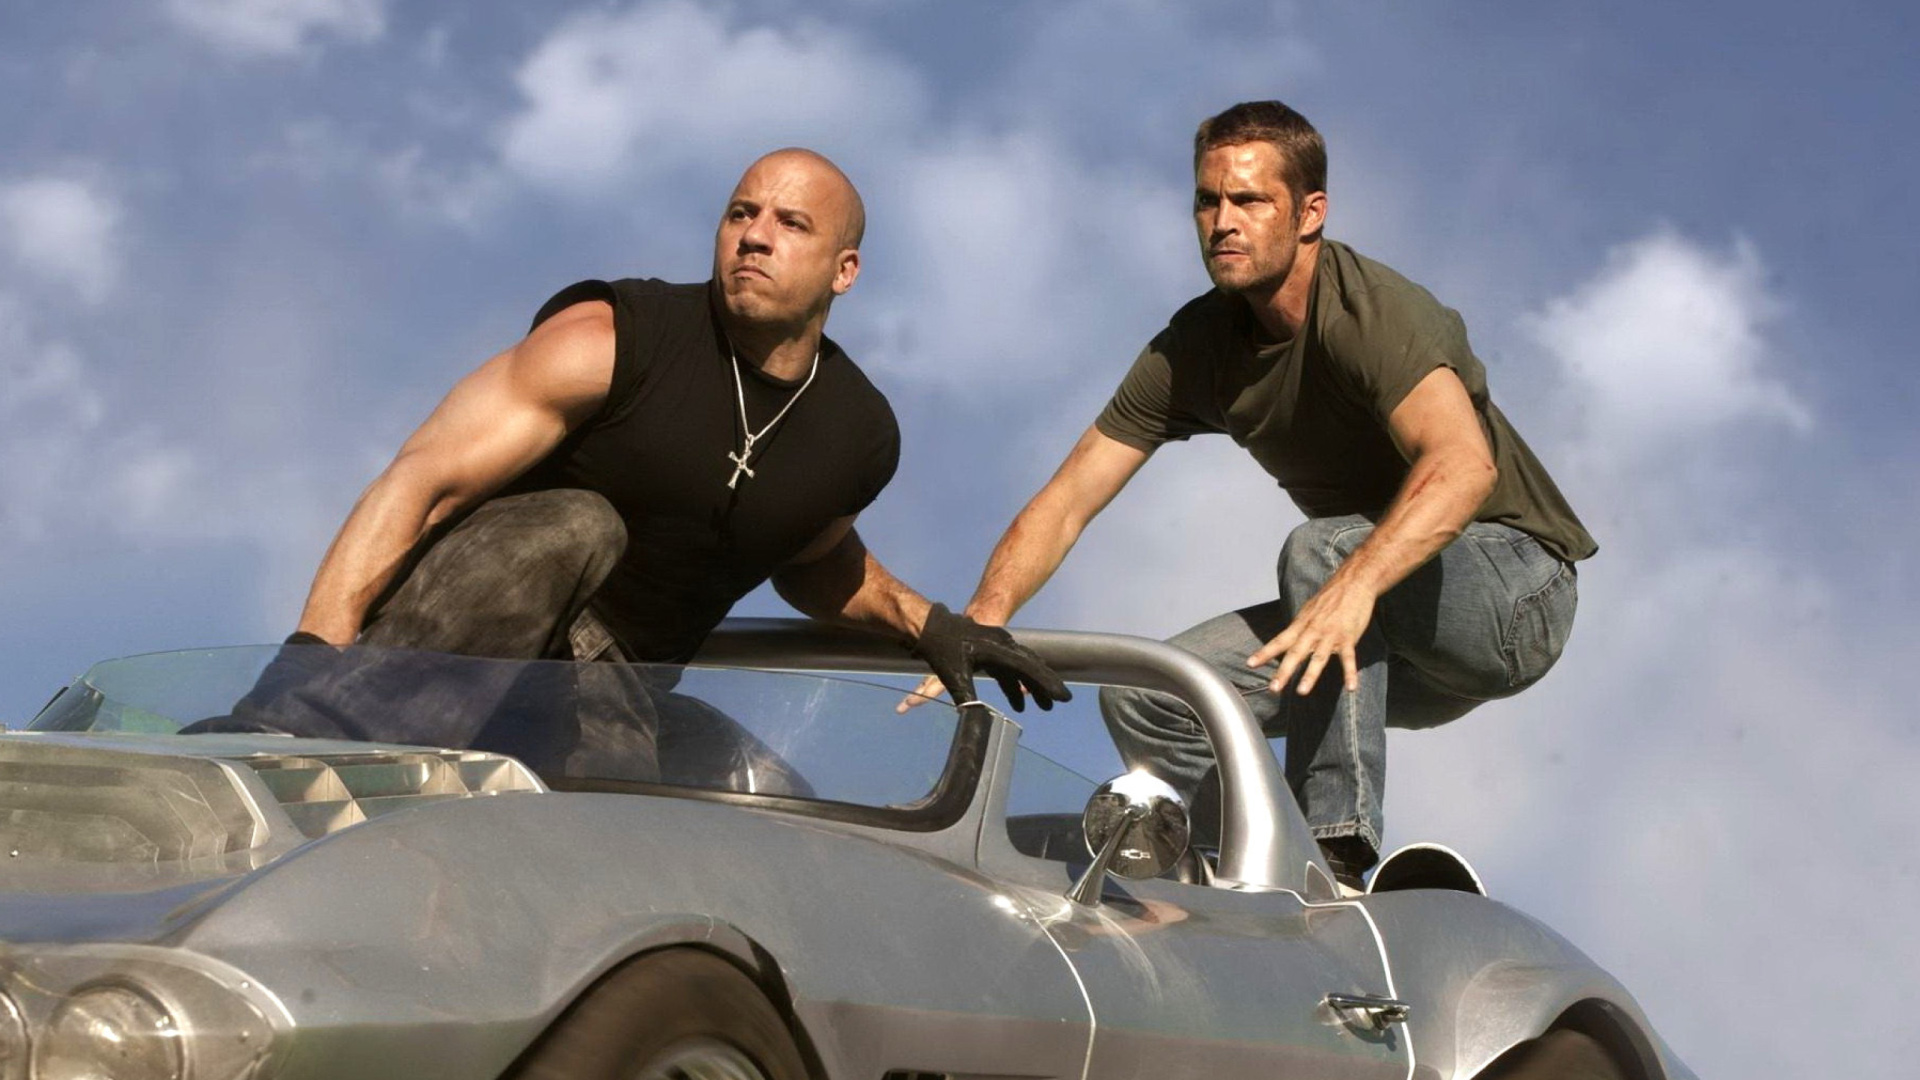 Fast and Furious 6 Episode wallpaper 1920x1080